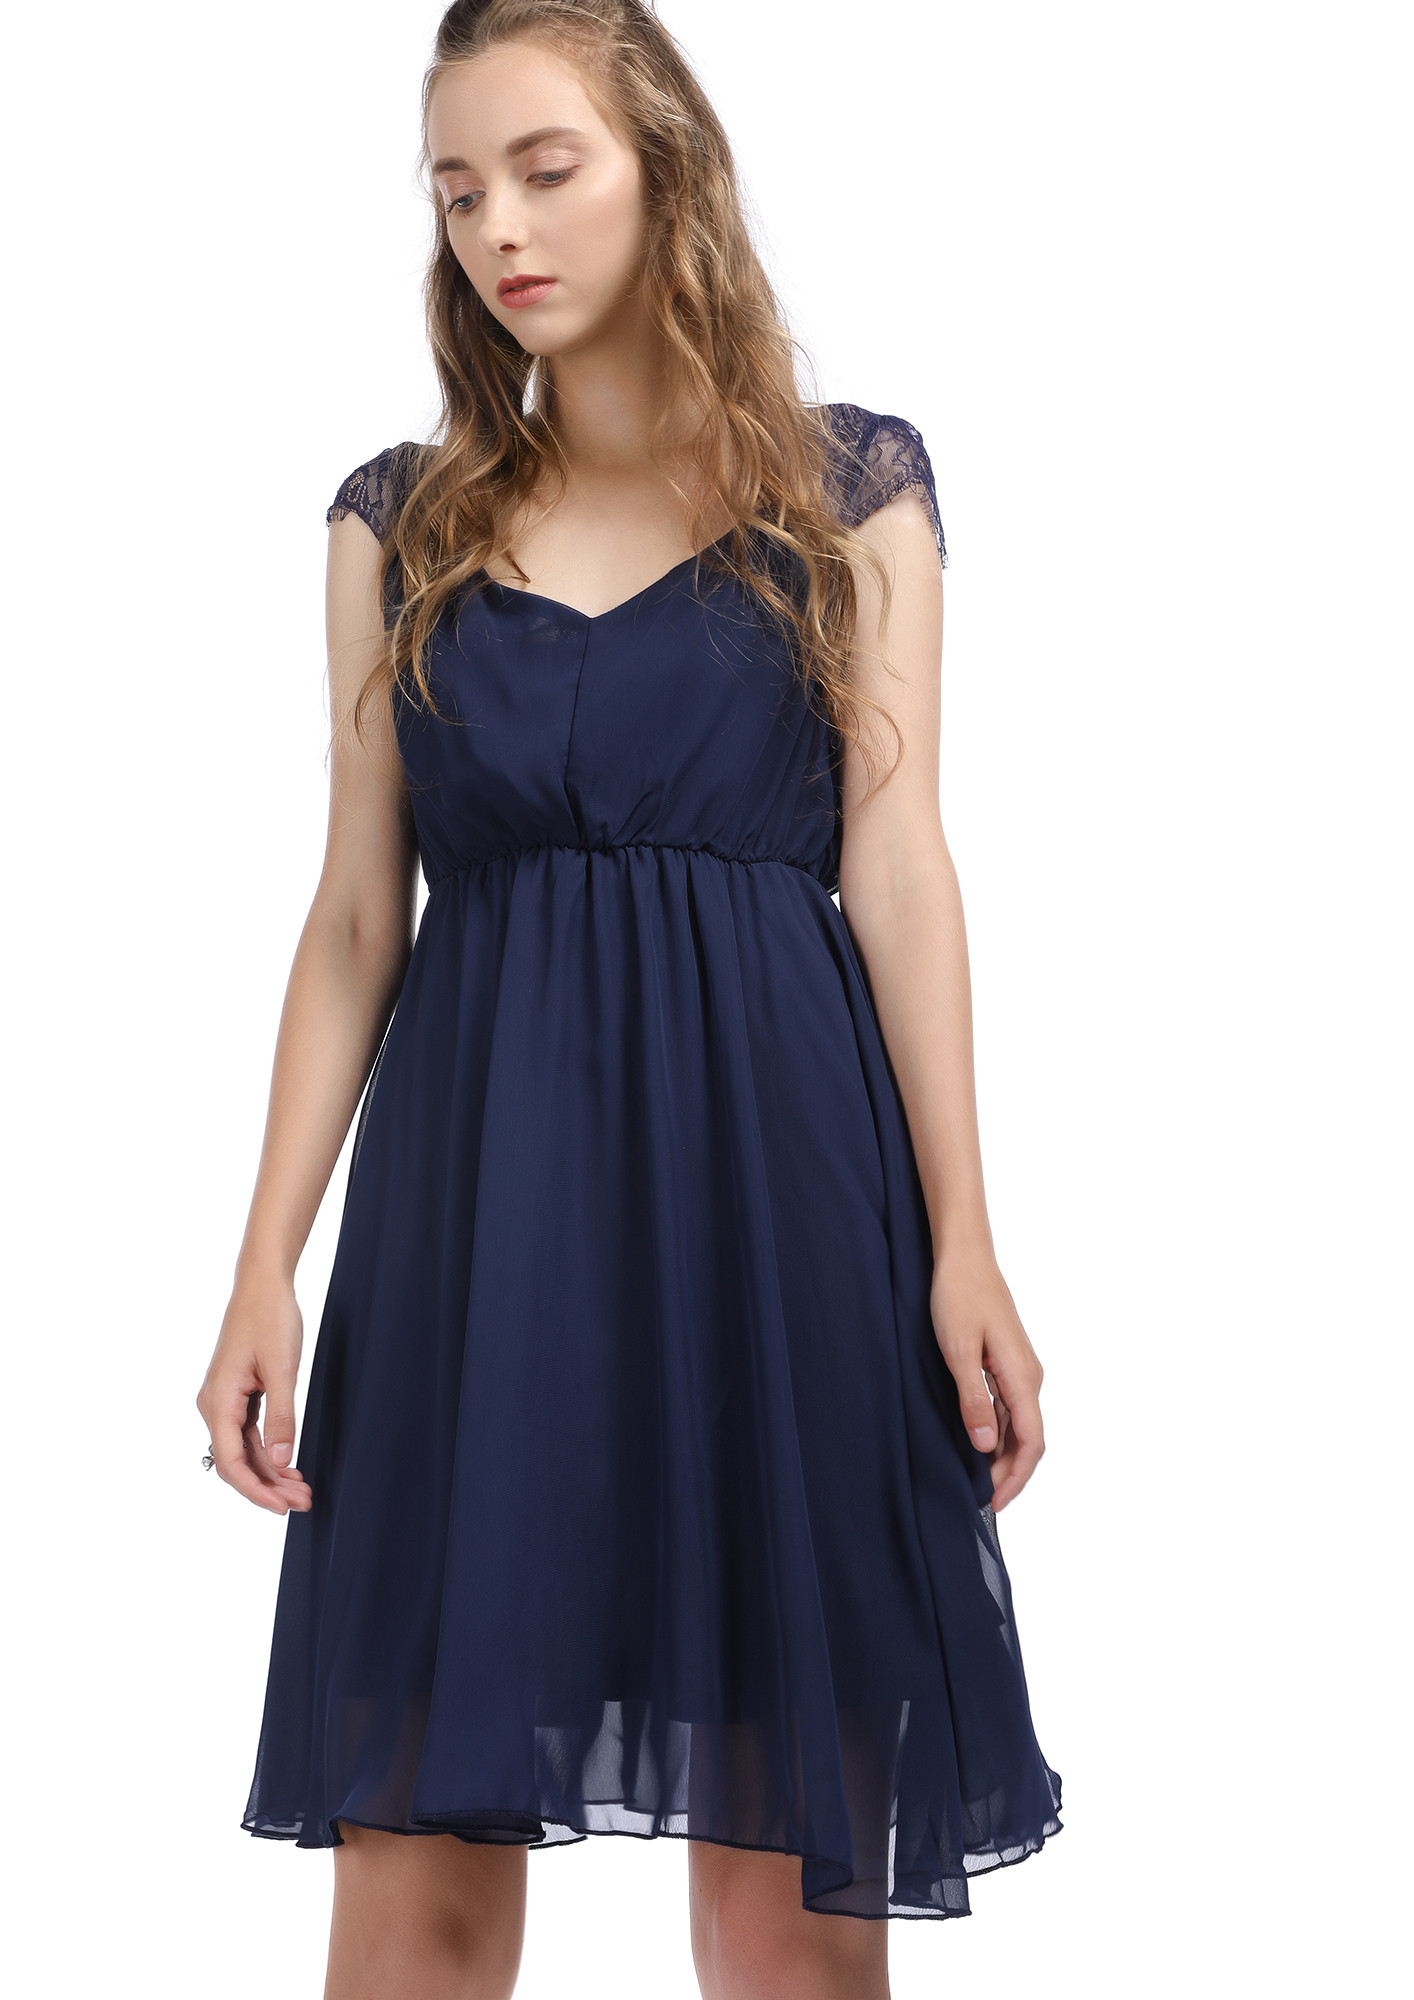 PERFECTLY MESHED NAVY SKATER DRESS